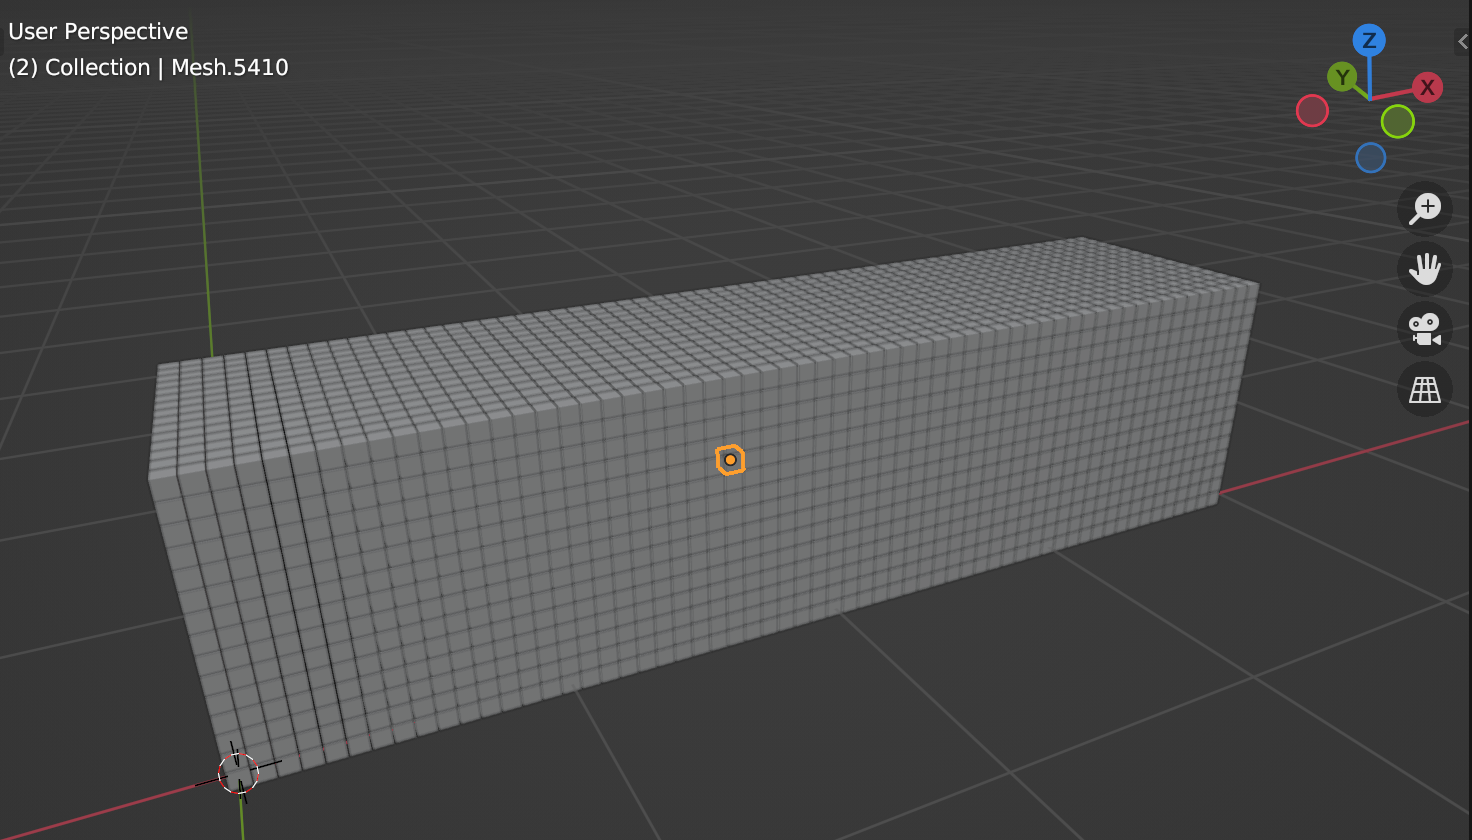 "Test scene in Blender showing thousands of cubes"